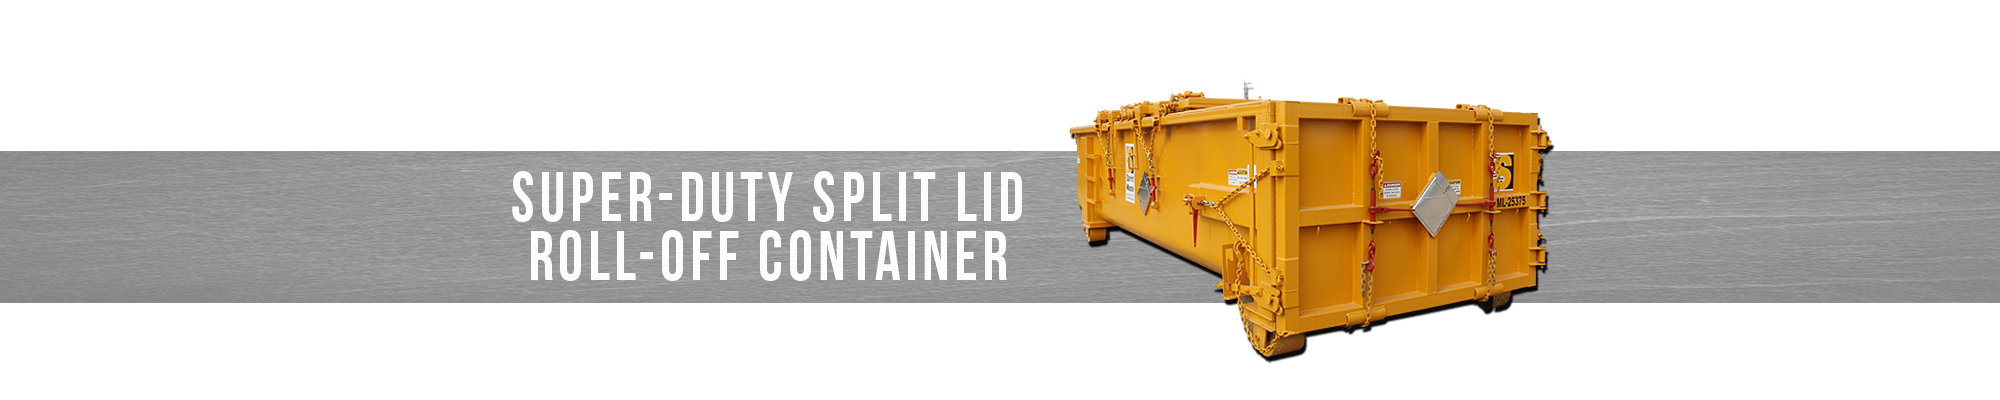 Super-Duty Split Lid Roll-Off Container